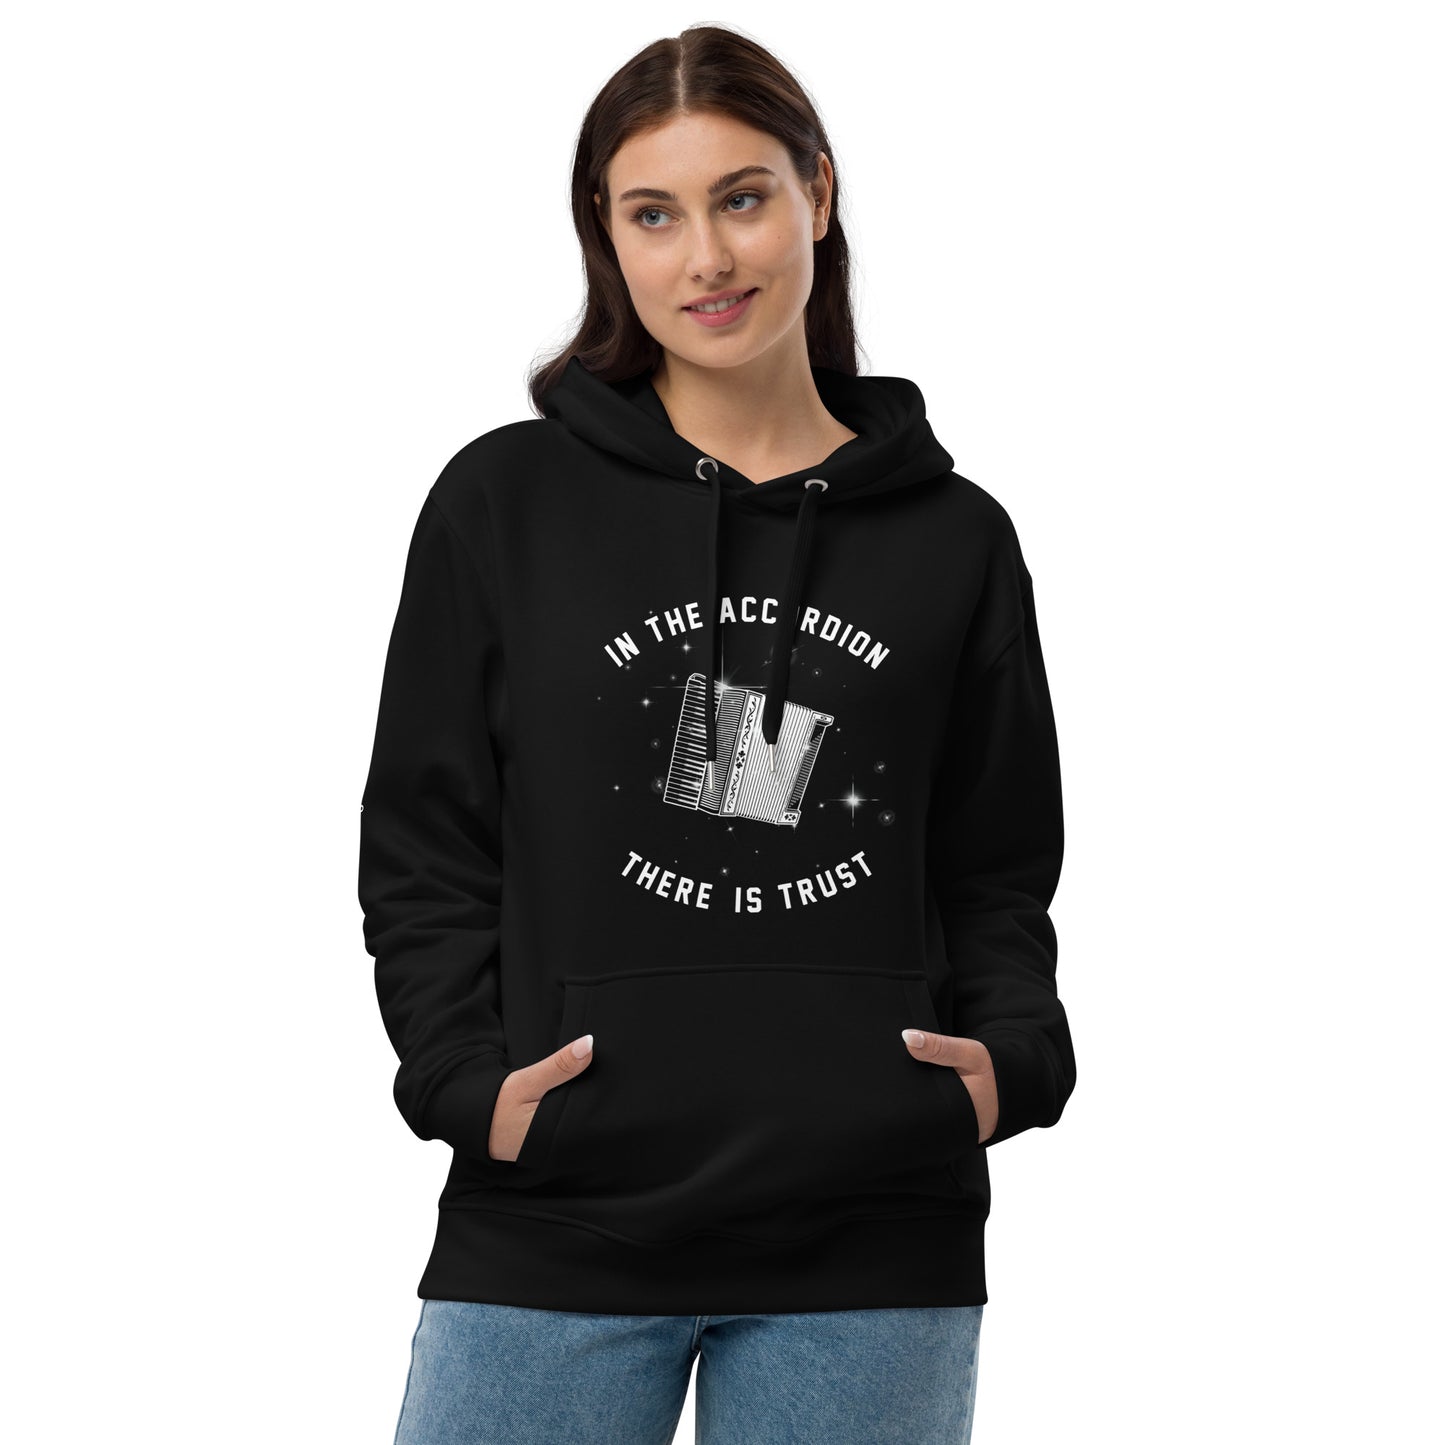 In the Accordion There is Trust Original Hoodie